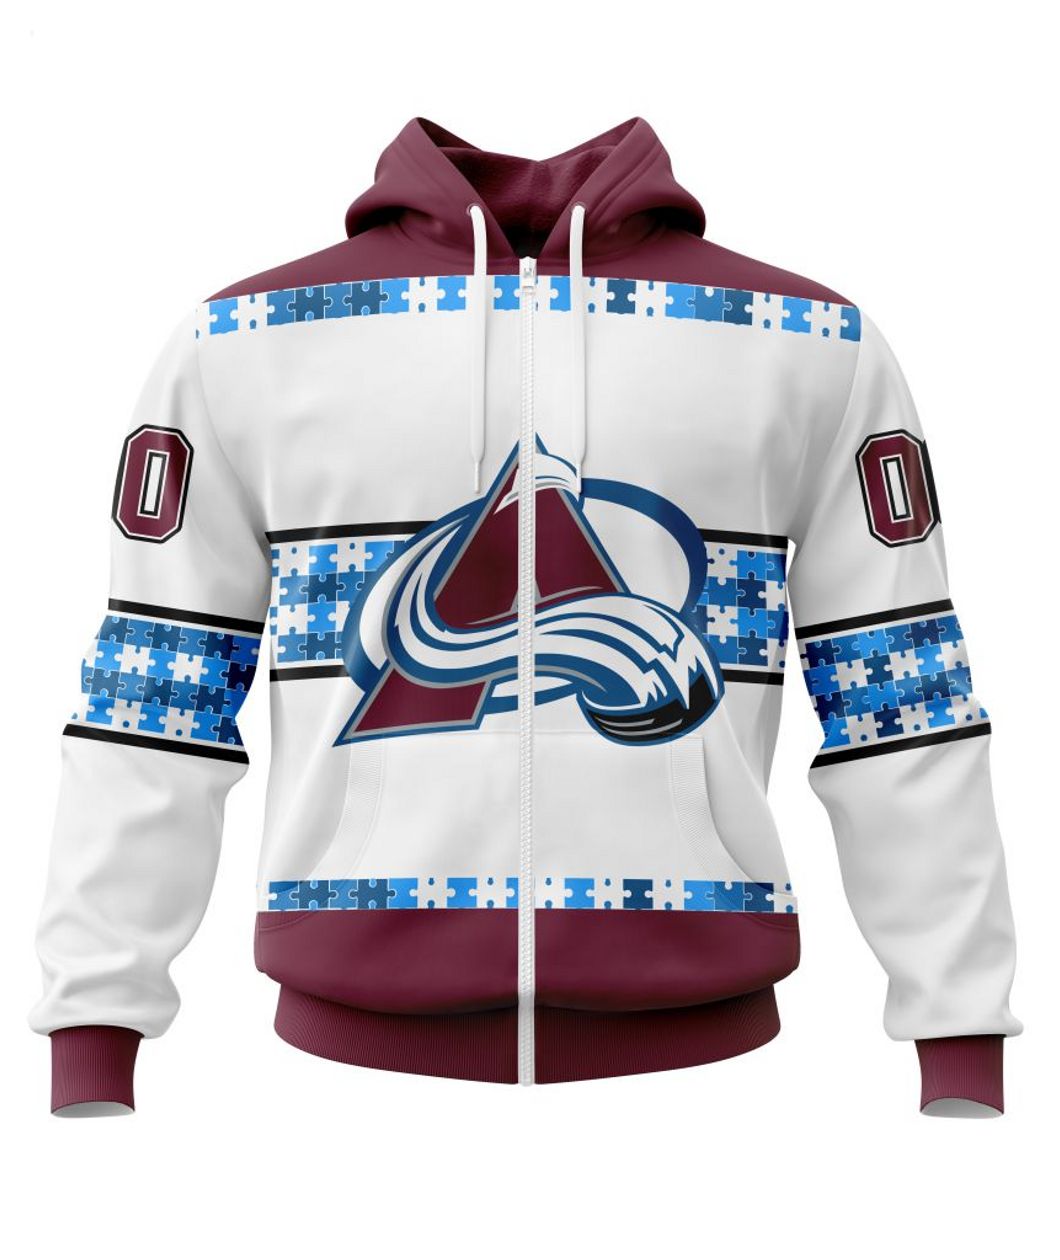 https://images.torunstyle.com/wp-content/uploads/2023/03/05090043/nhl-colorado-avalanche-autism-awareness-custom-name-and-number-3d-hoodie-2-dWa6g.jpg